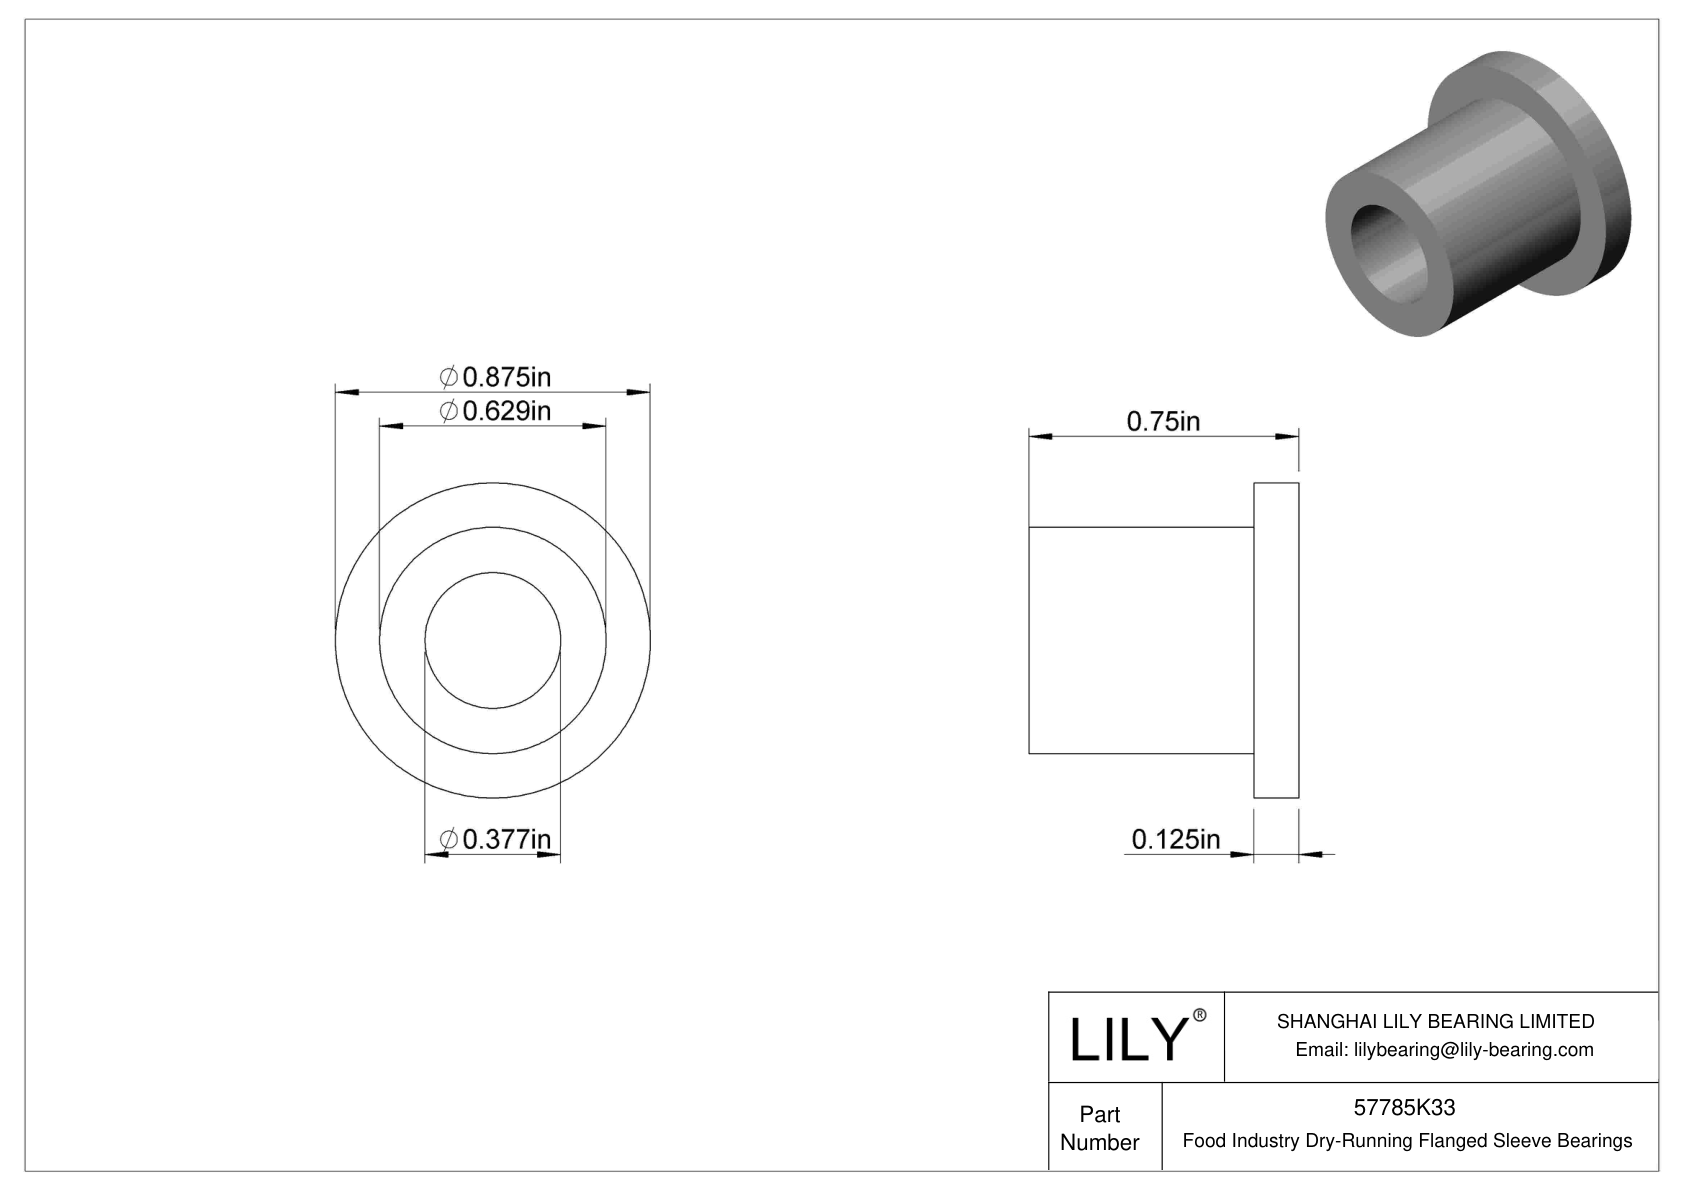 FHHIFKDD Food Industry Dry-Running Flanged Sleeve Bearings cad drawing